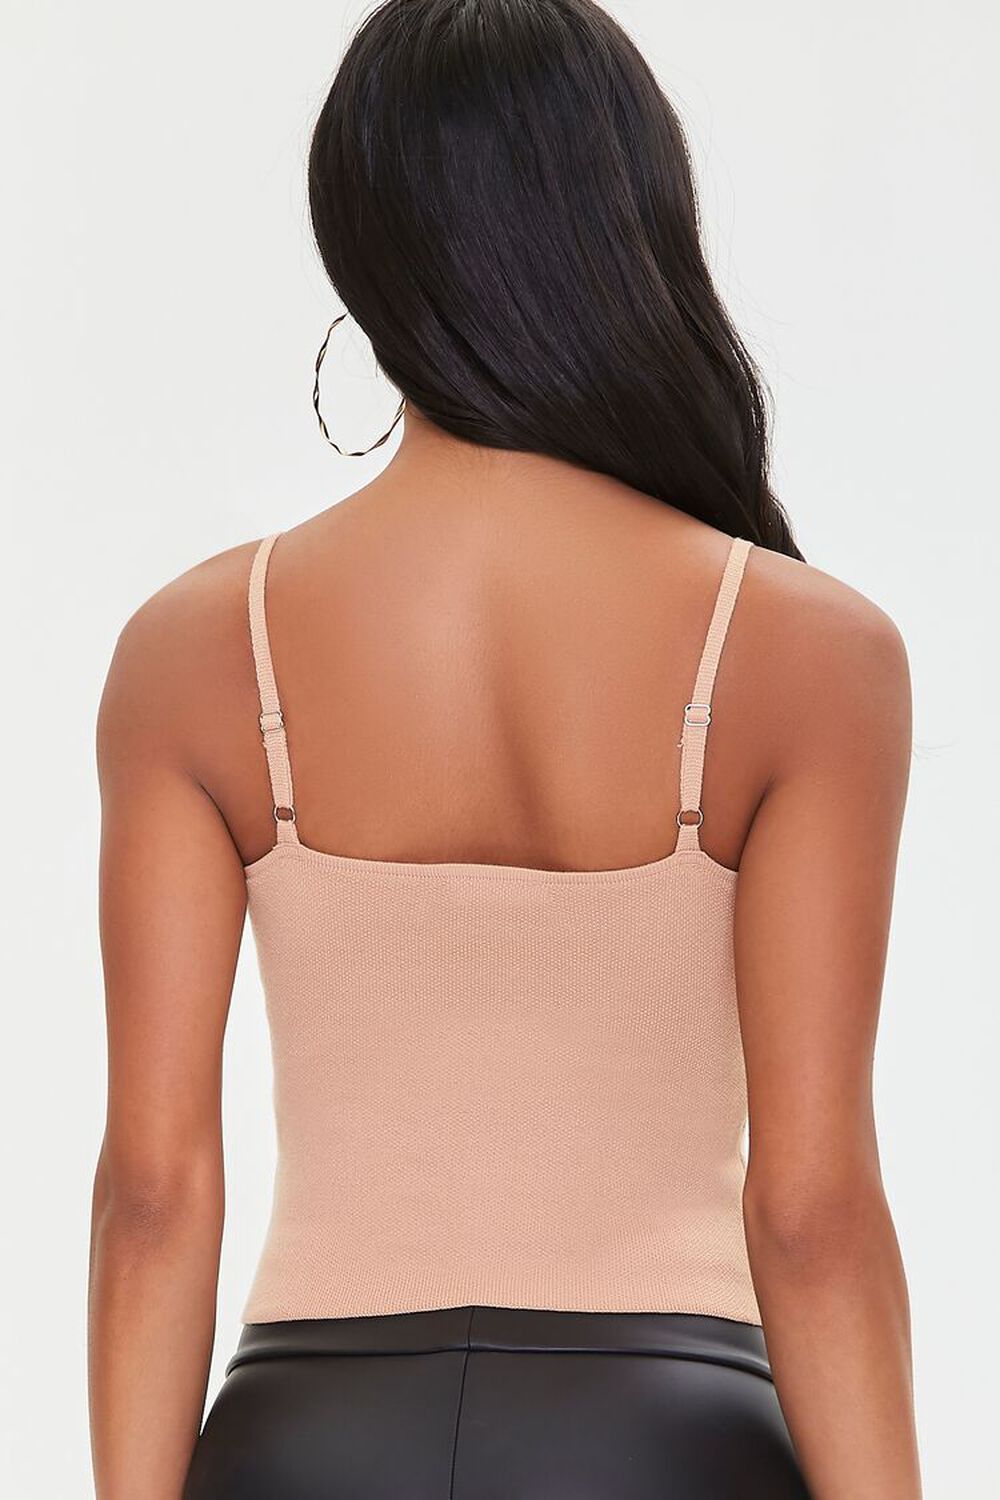 NUDE Sweater-Knit Bustier Cami, image 3